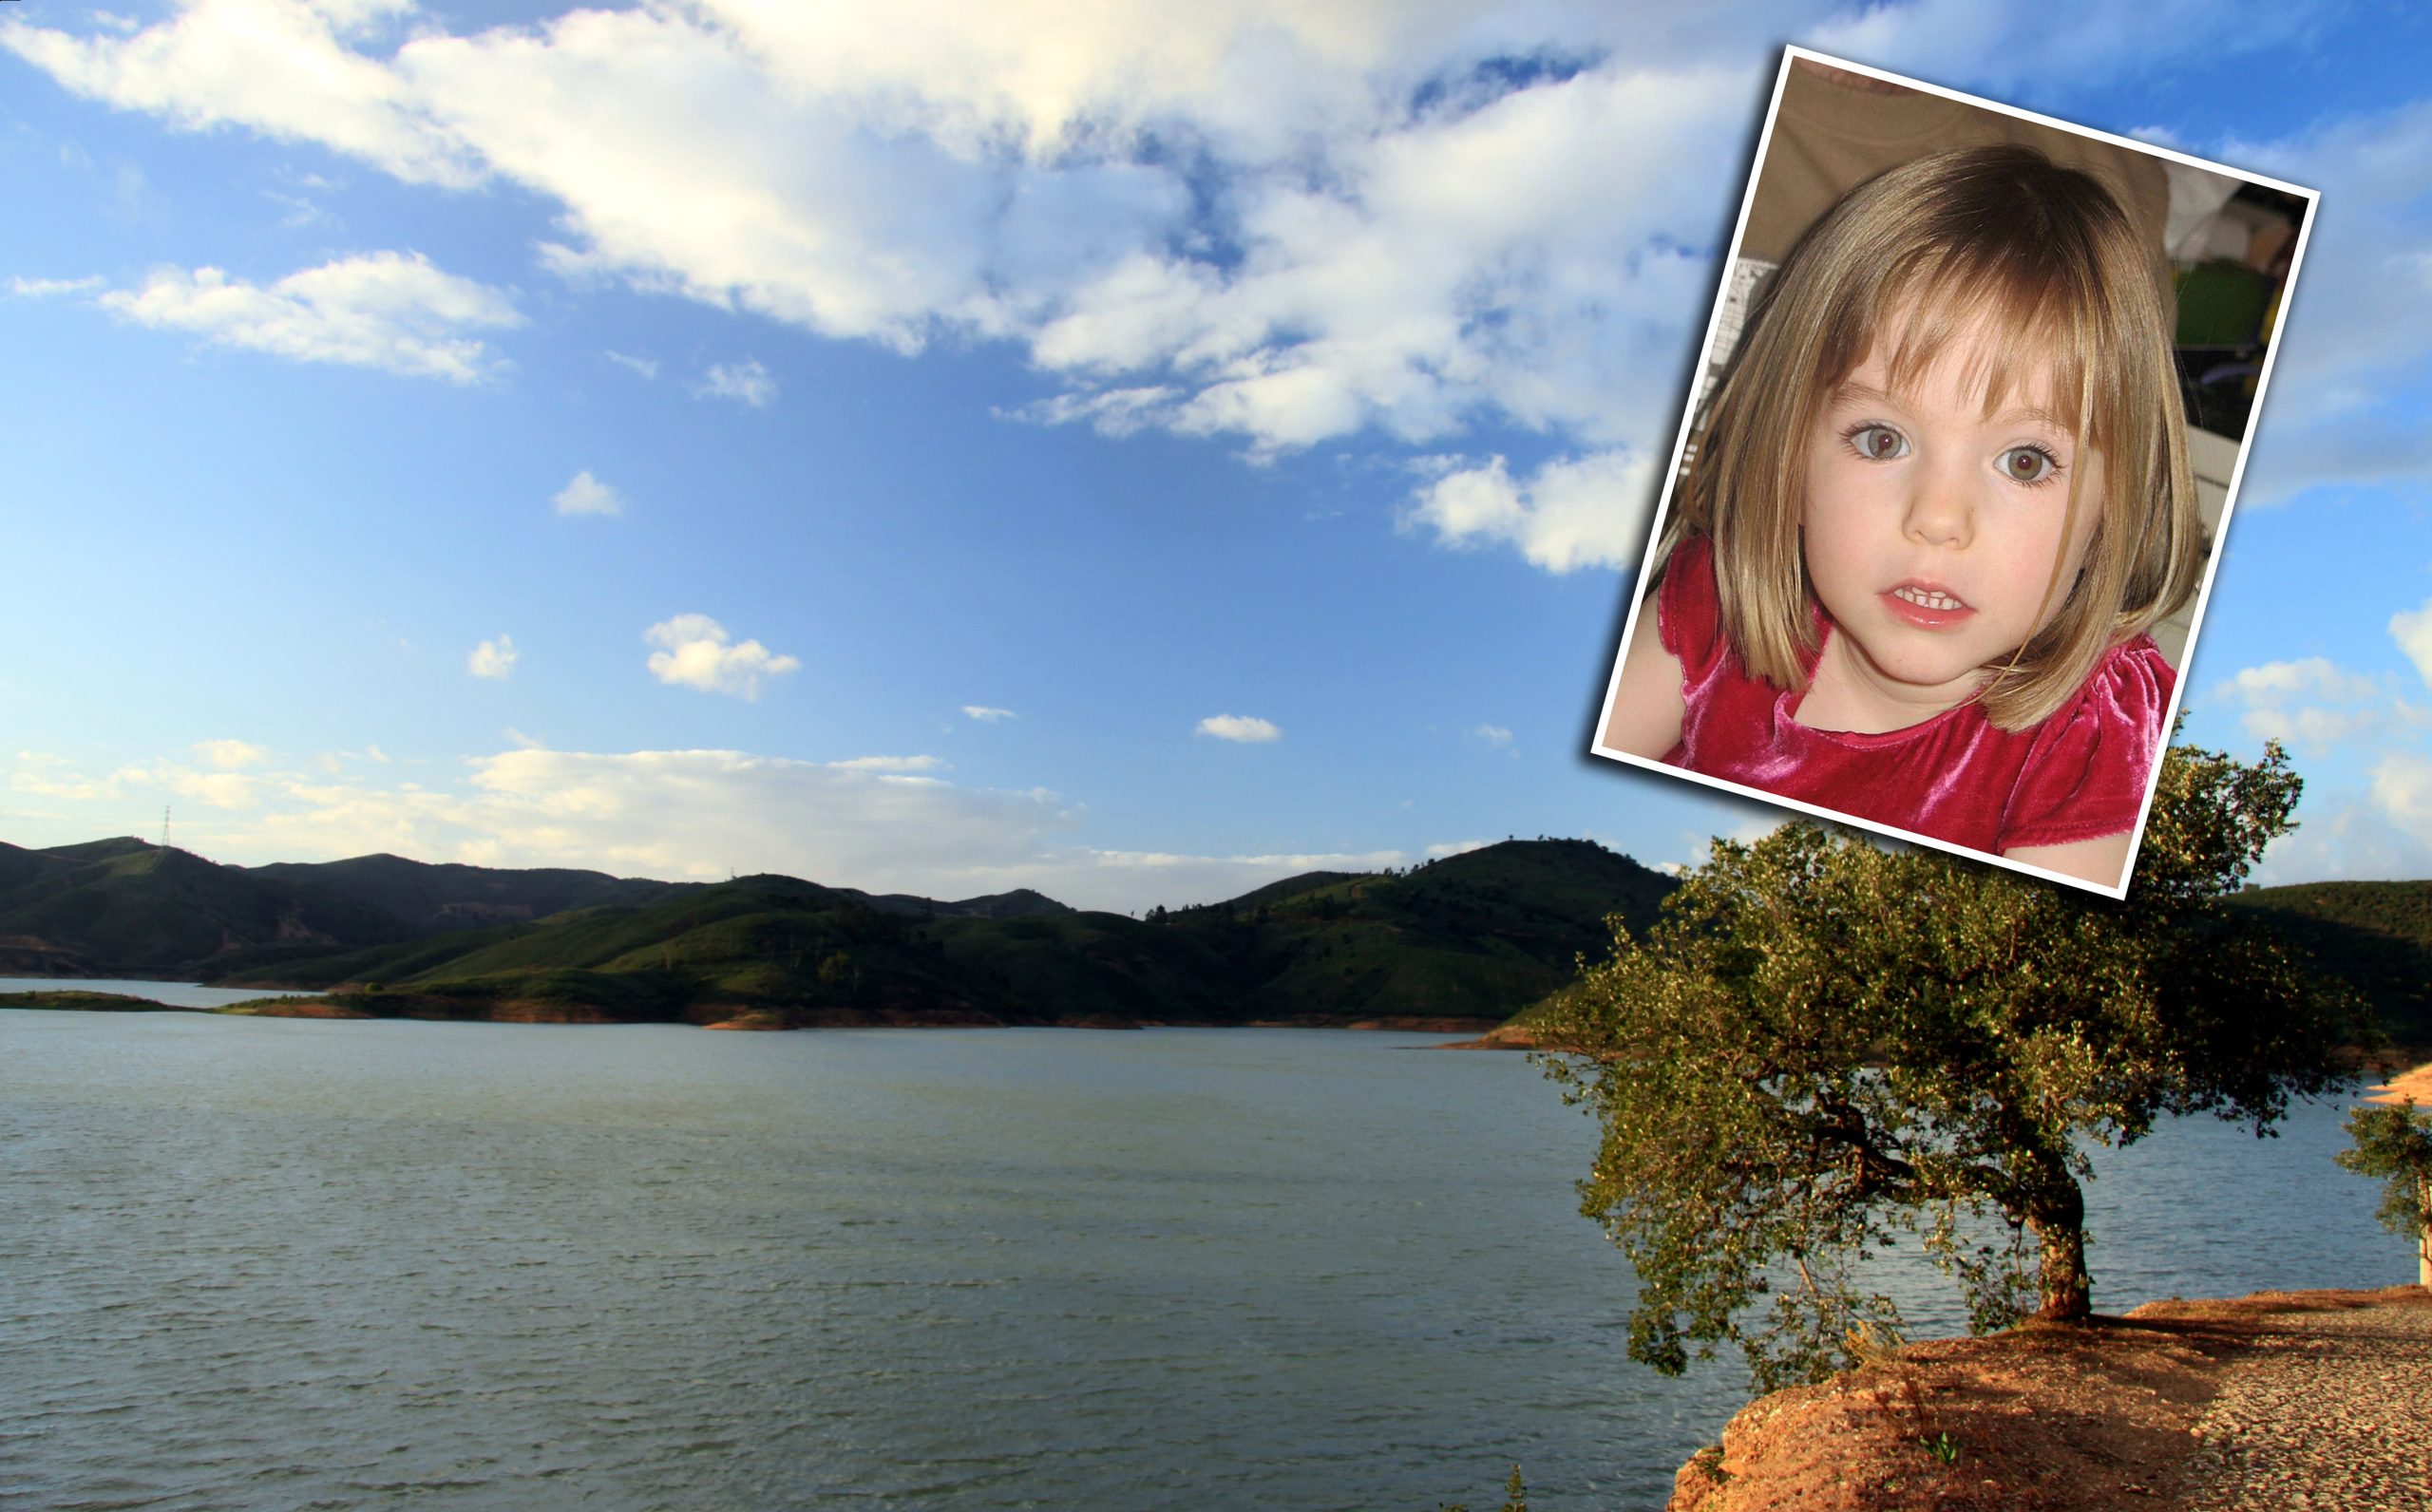 New Search for Madeleine McCann in Portugal: Land Focus, Not Water